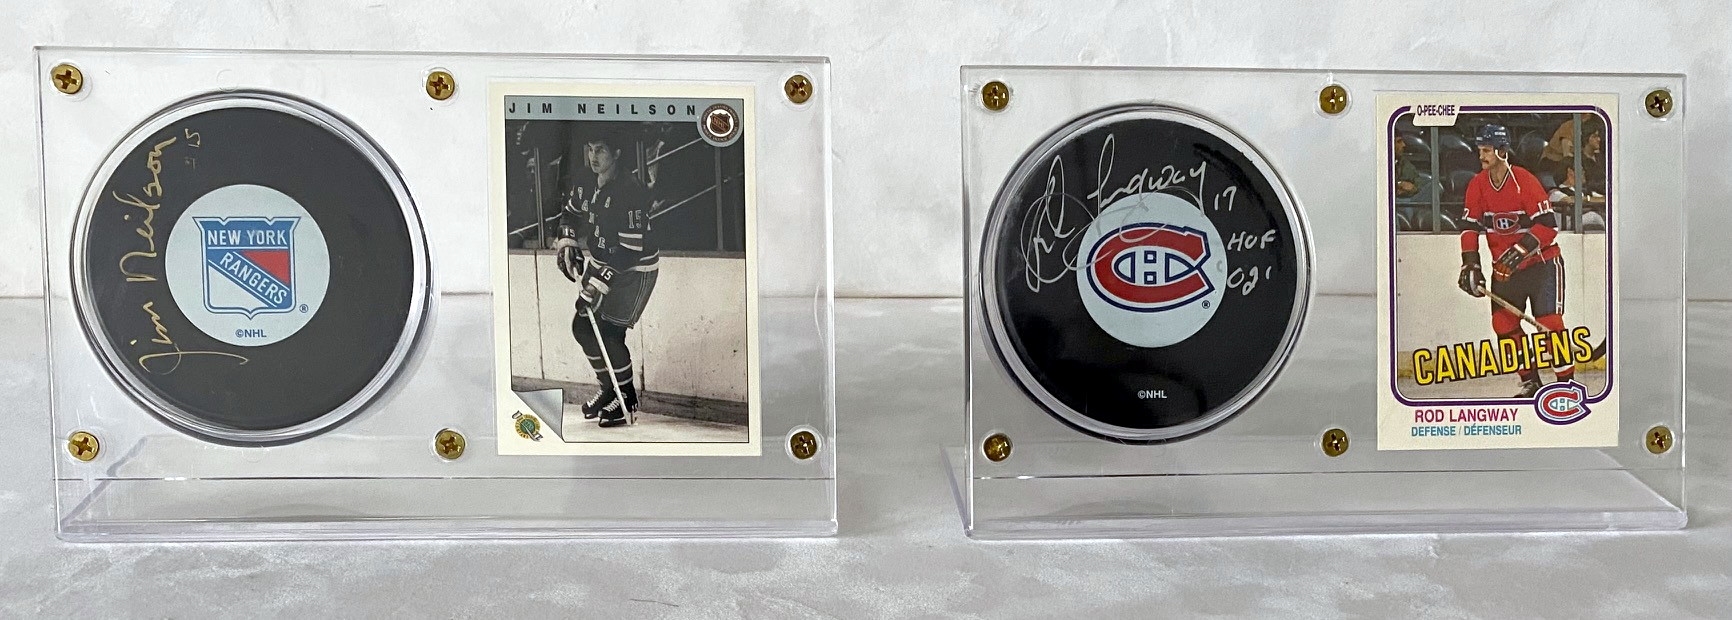 Rod Langway Canadiens & Jim Neilson Rangers Lot of 2 Signed Puck & Card Holders